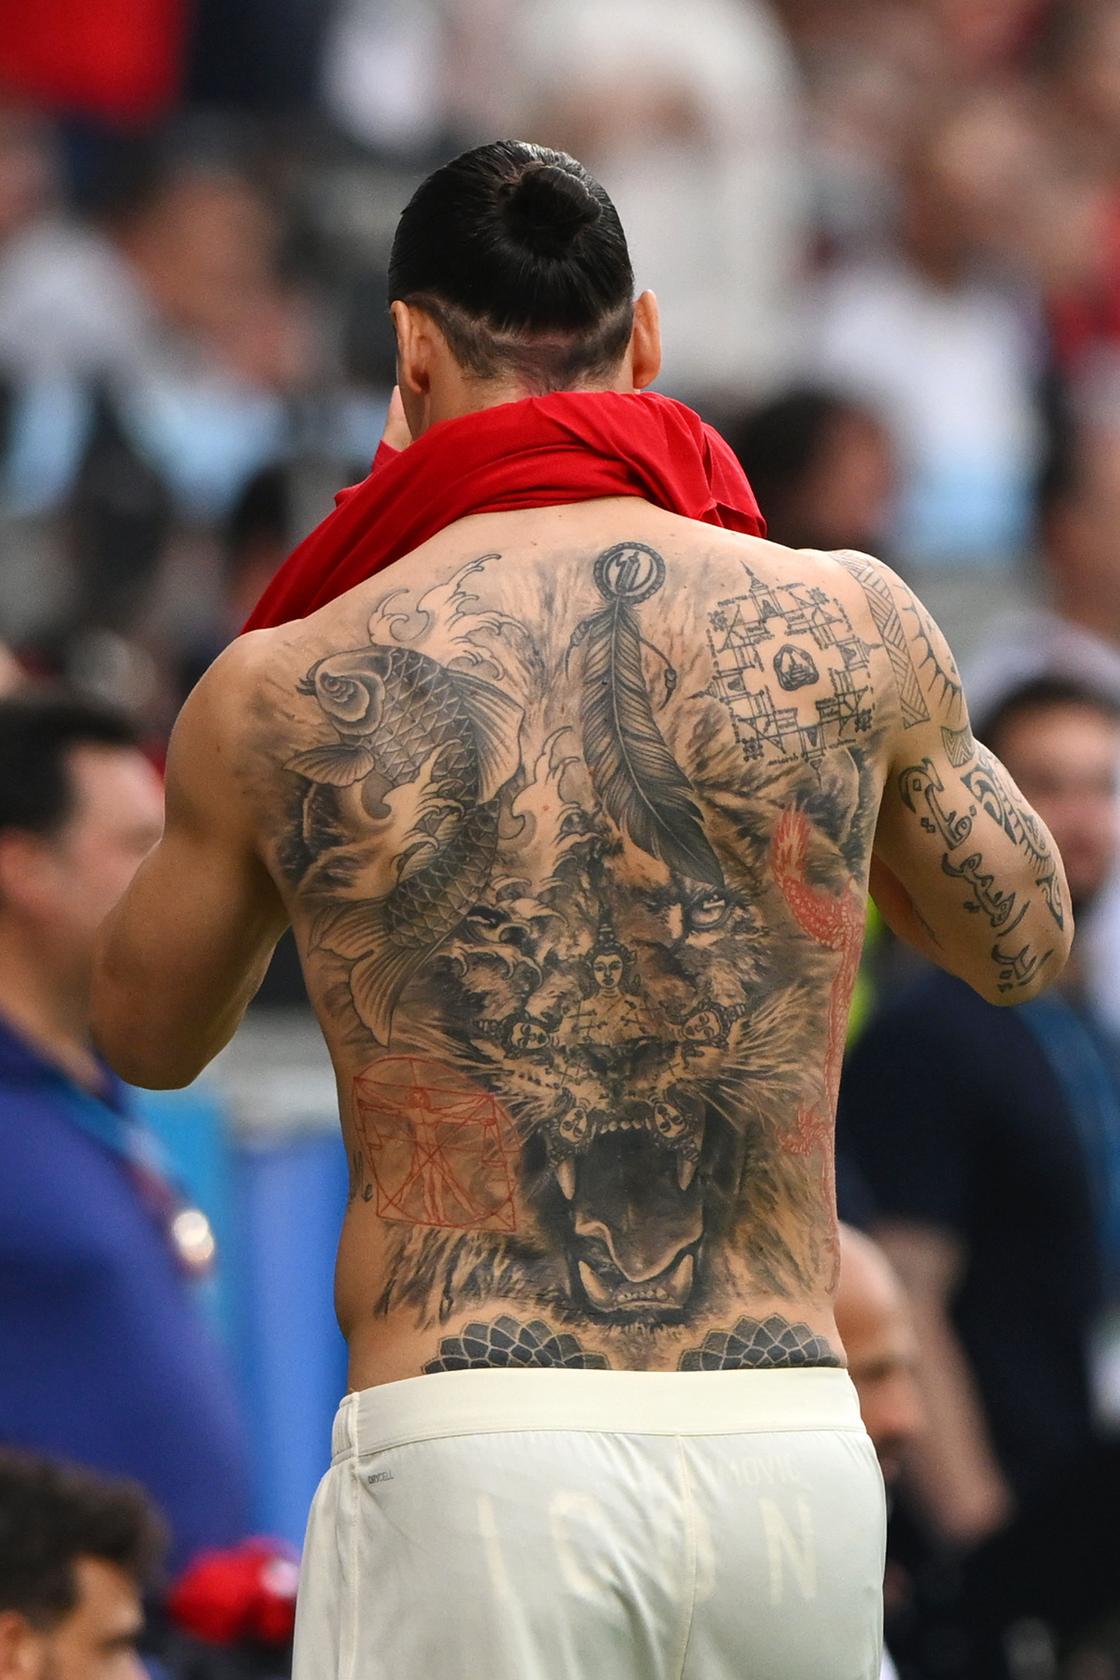 Top 10 Football Players Tattoos  Footballers Tattoos Stories  Lifestyle  Today  YouTube